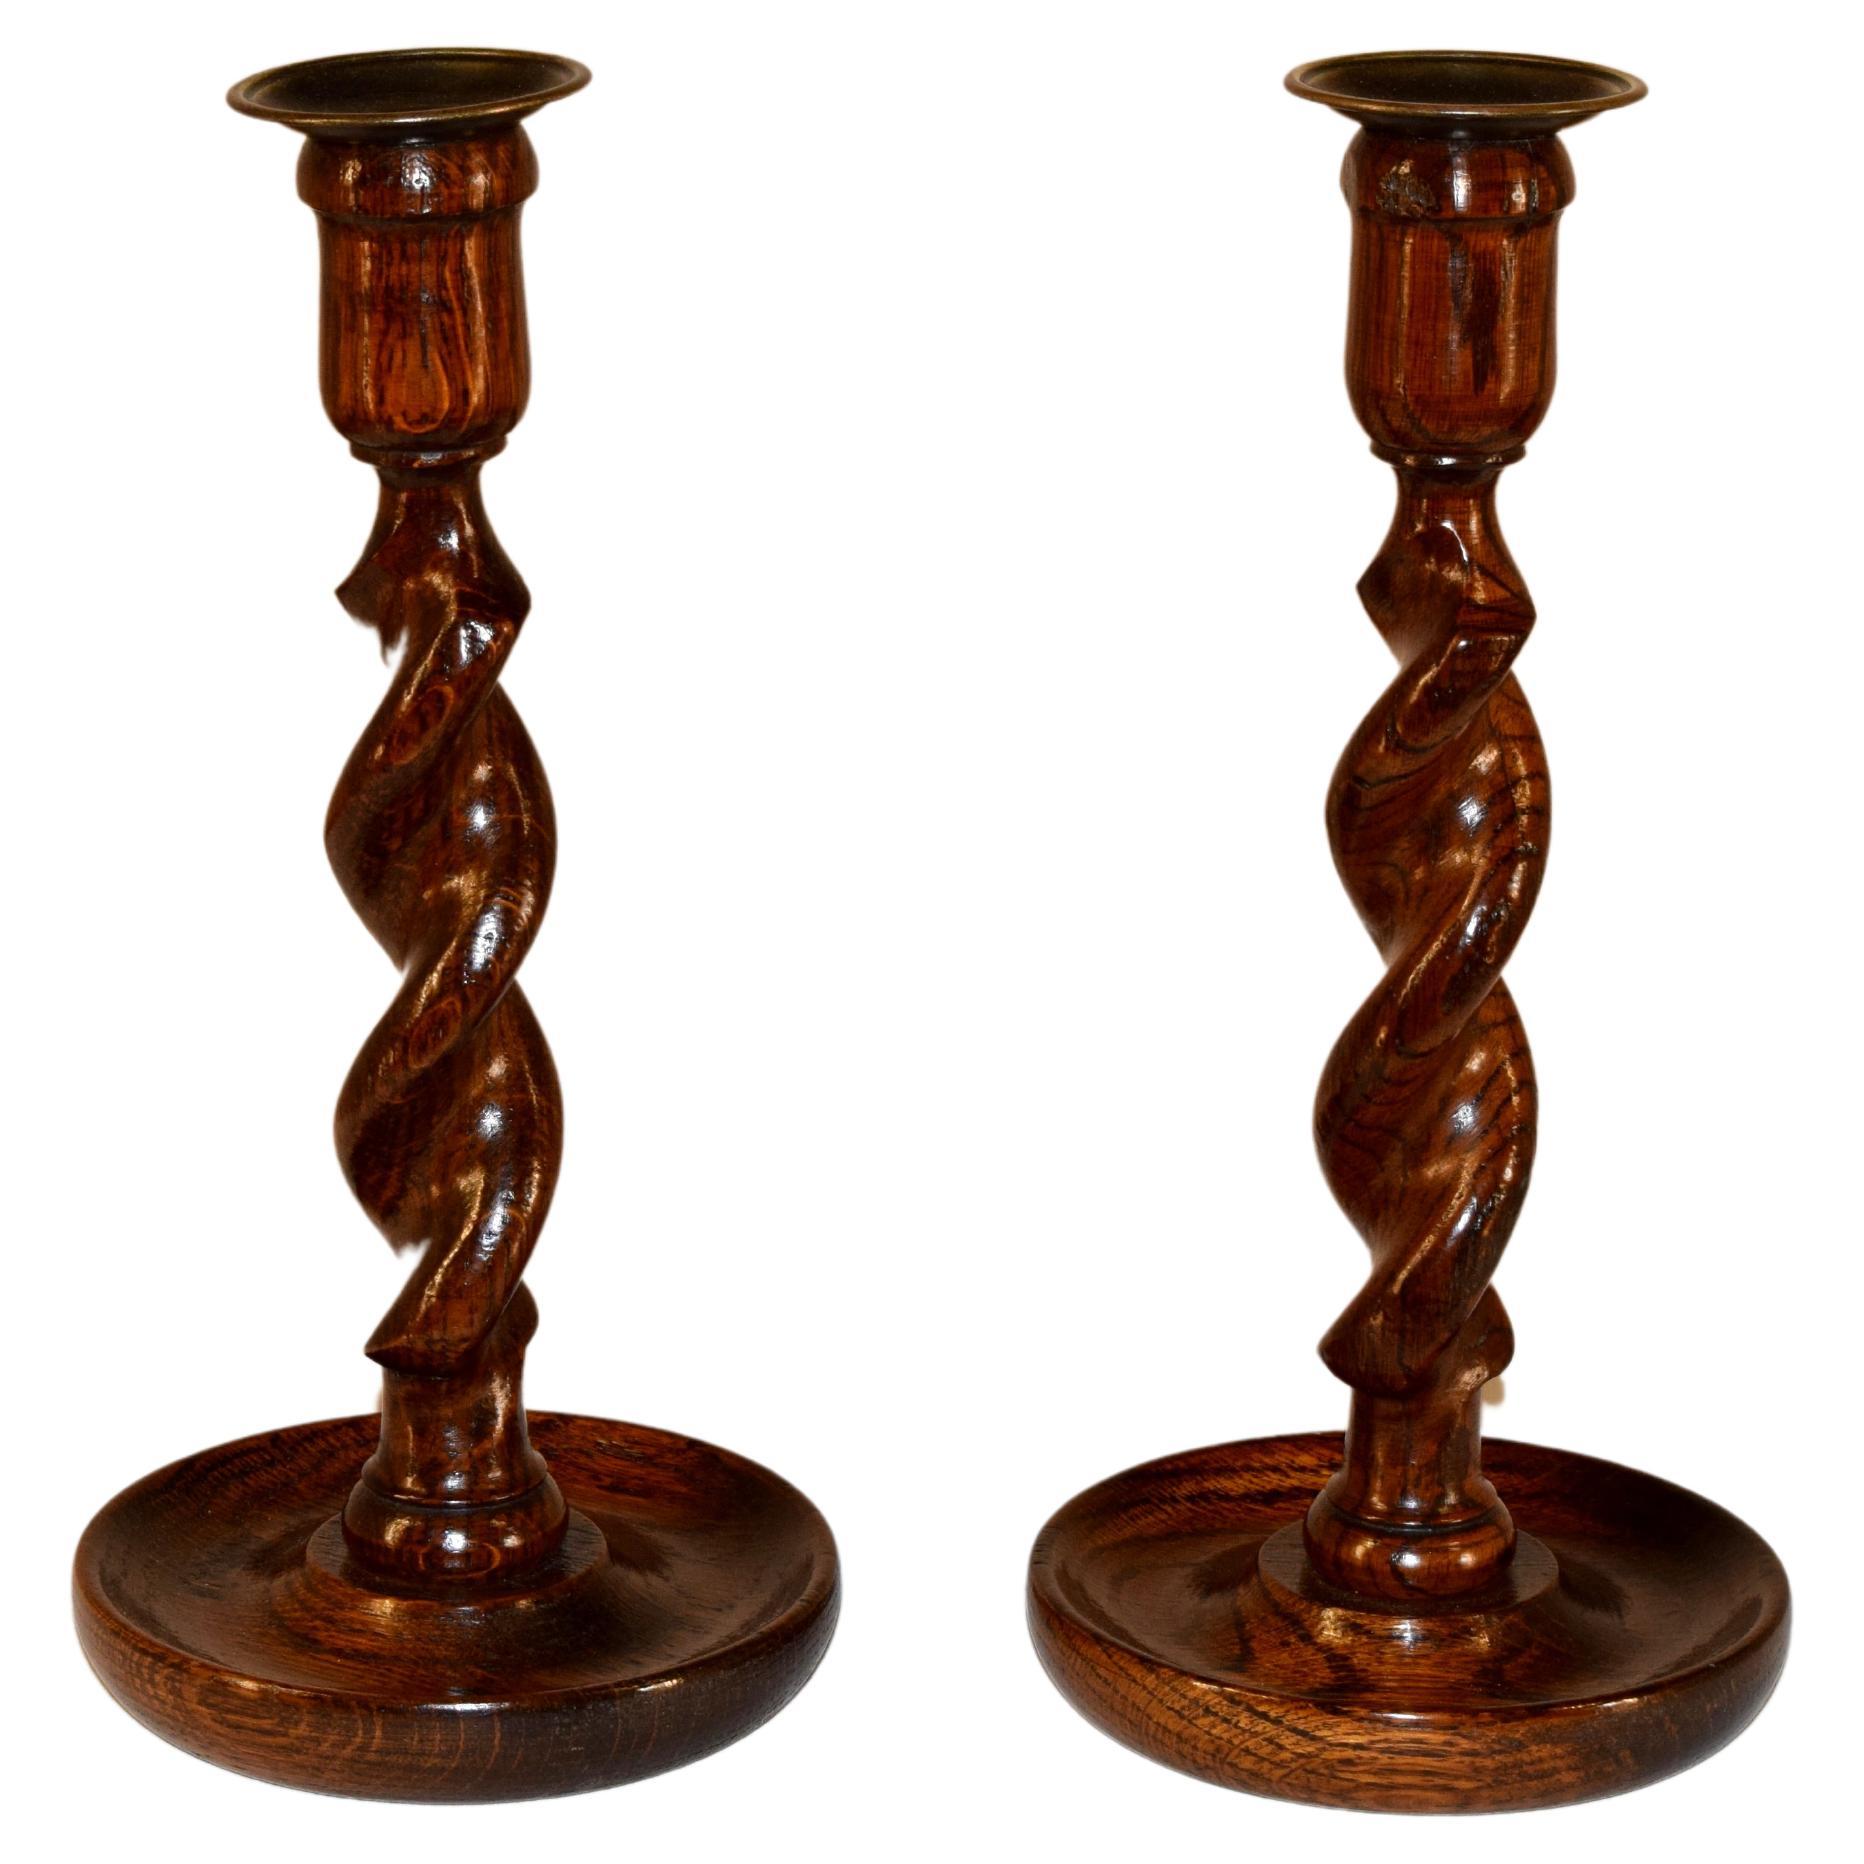 Pair of Late 19th Century Candlesticks